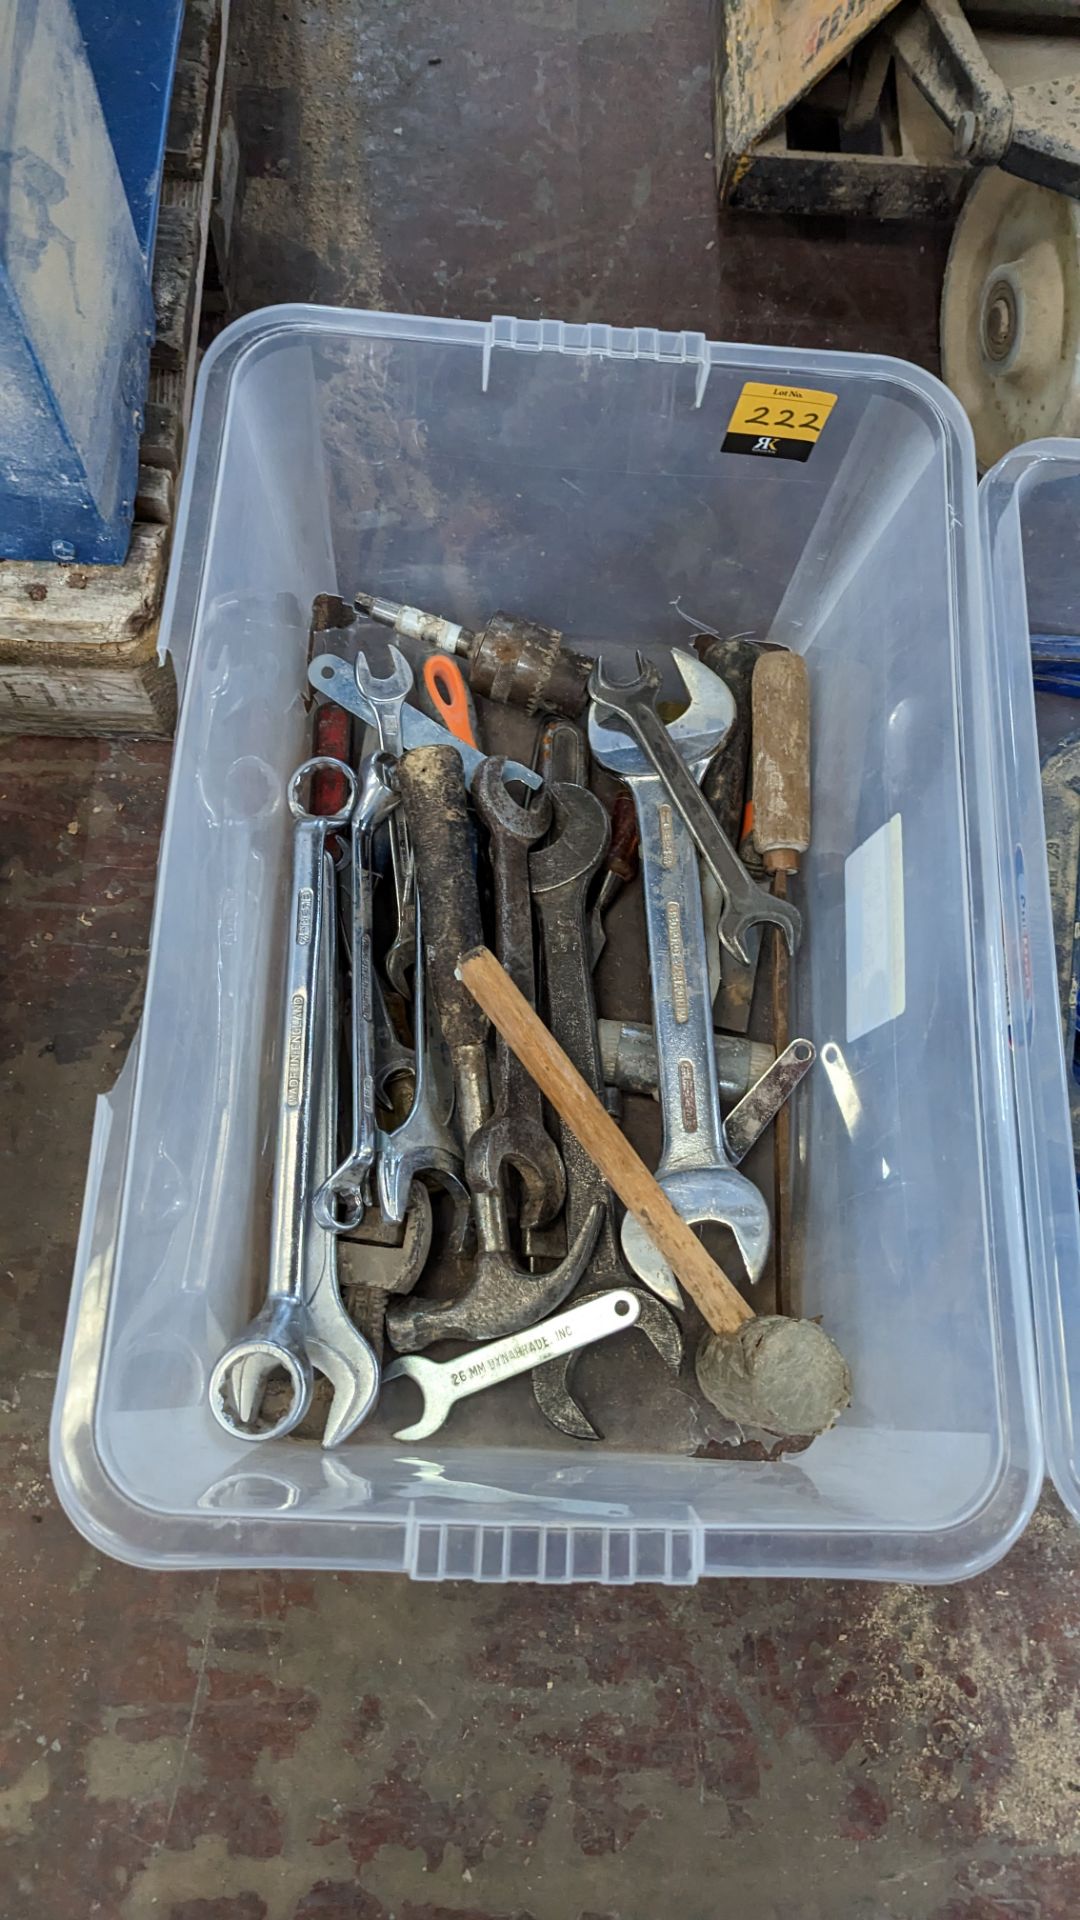 The contents of a crate of hand tools